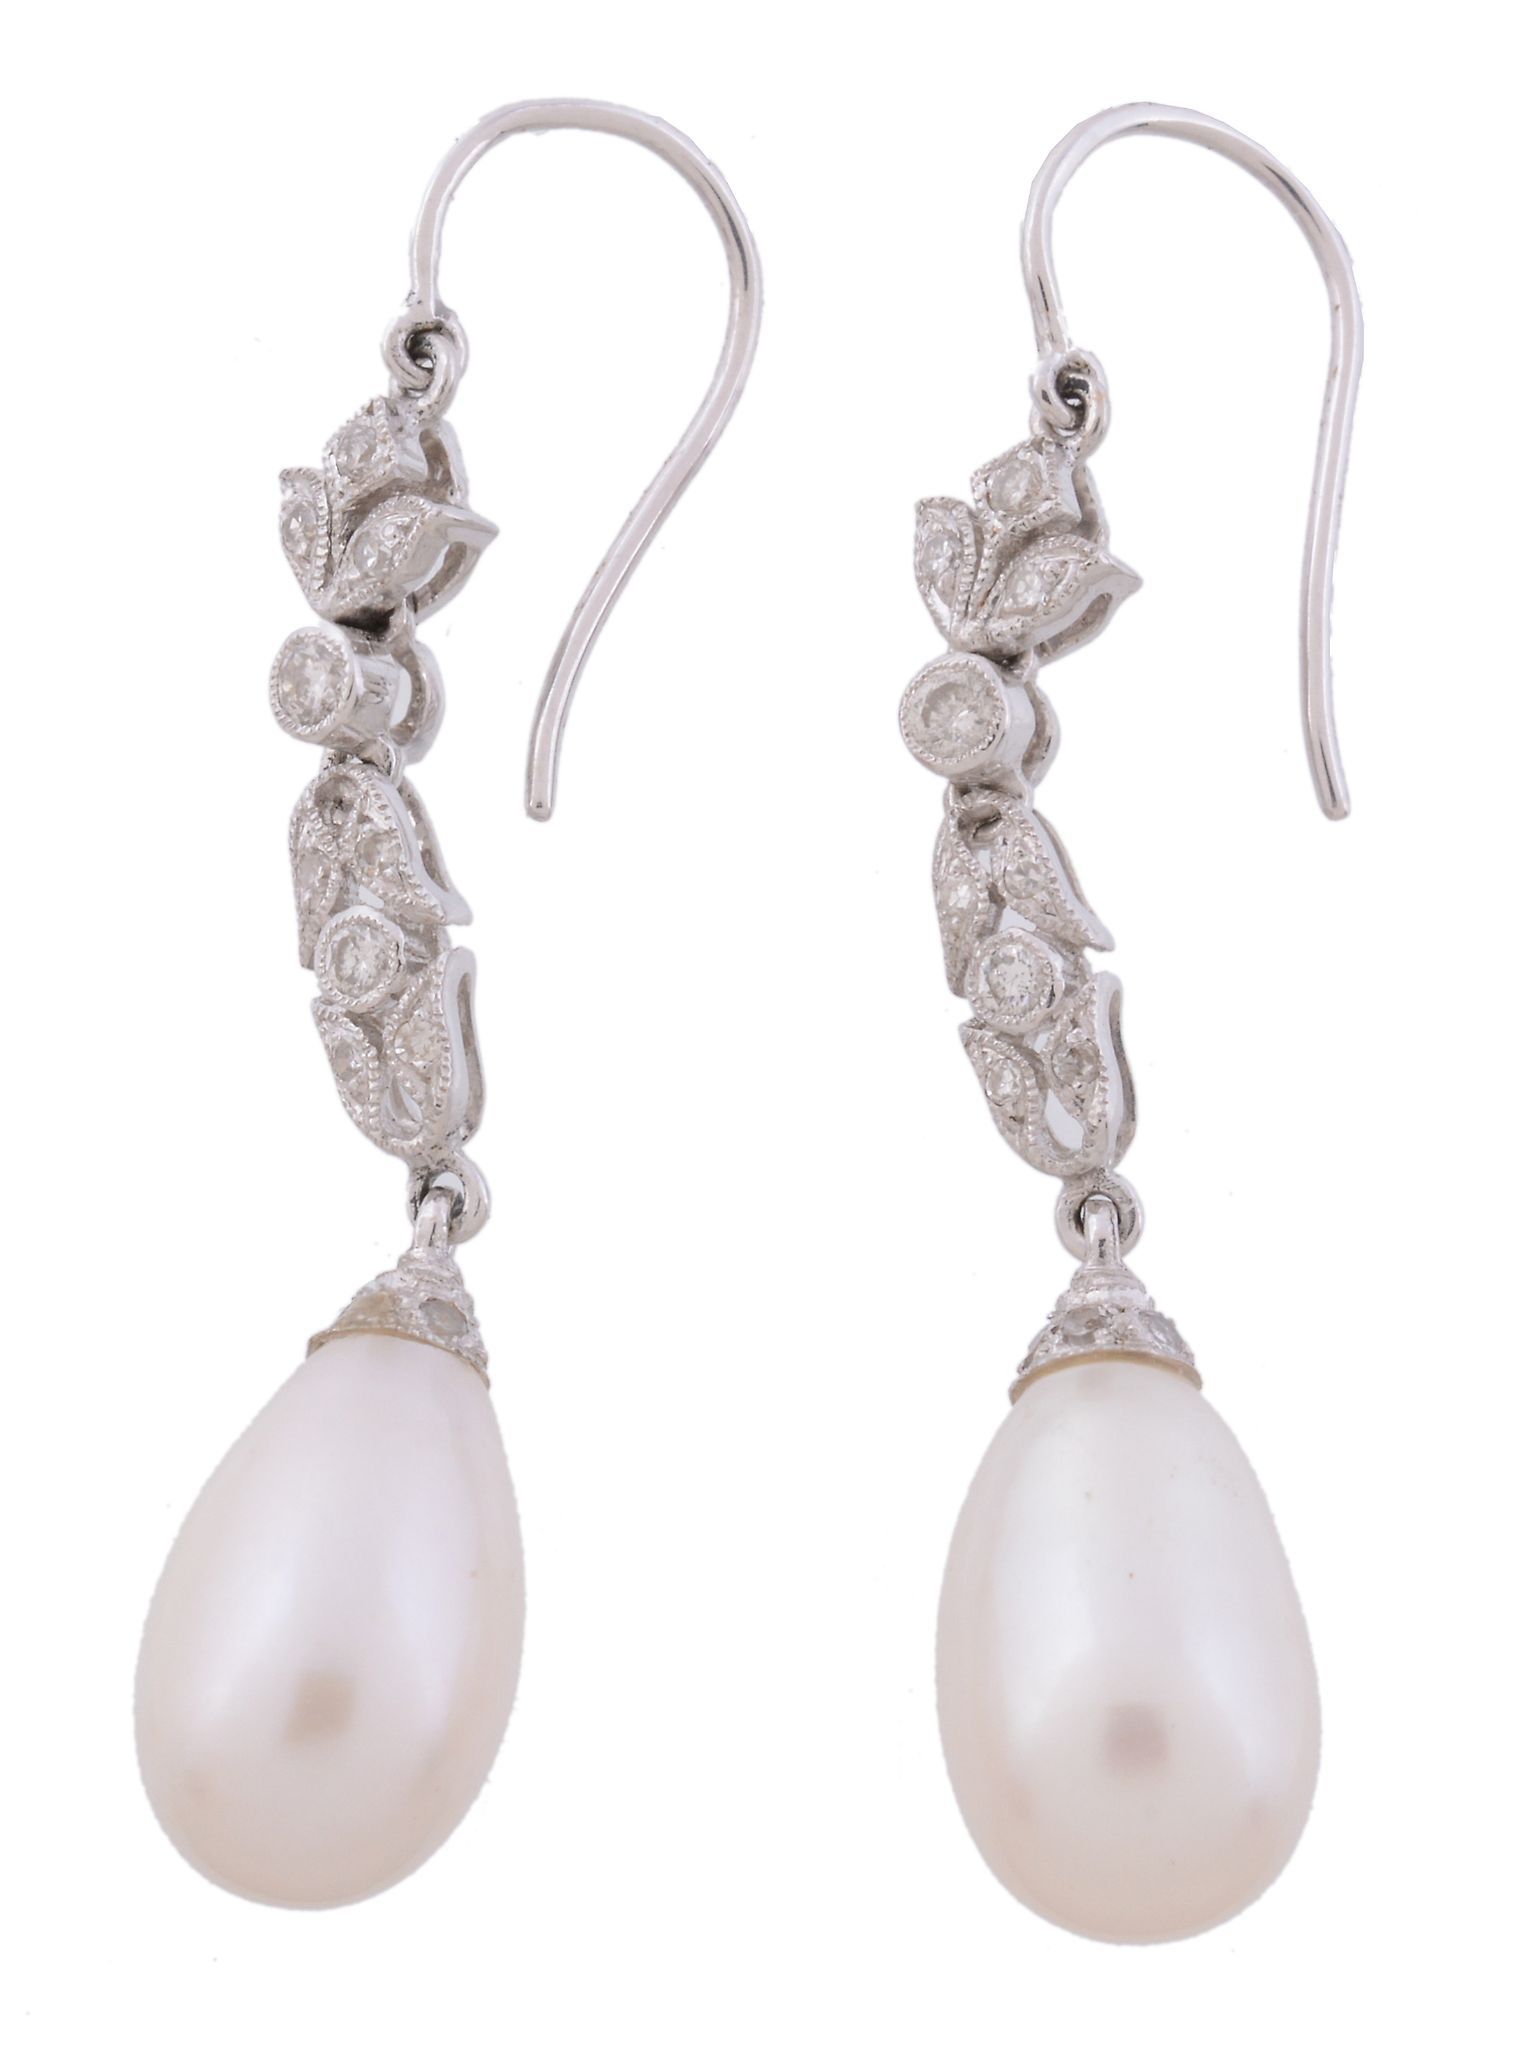 A pair of freshwater cultured pearl and diamond drop earrings   A pair of freshwater cultured